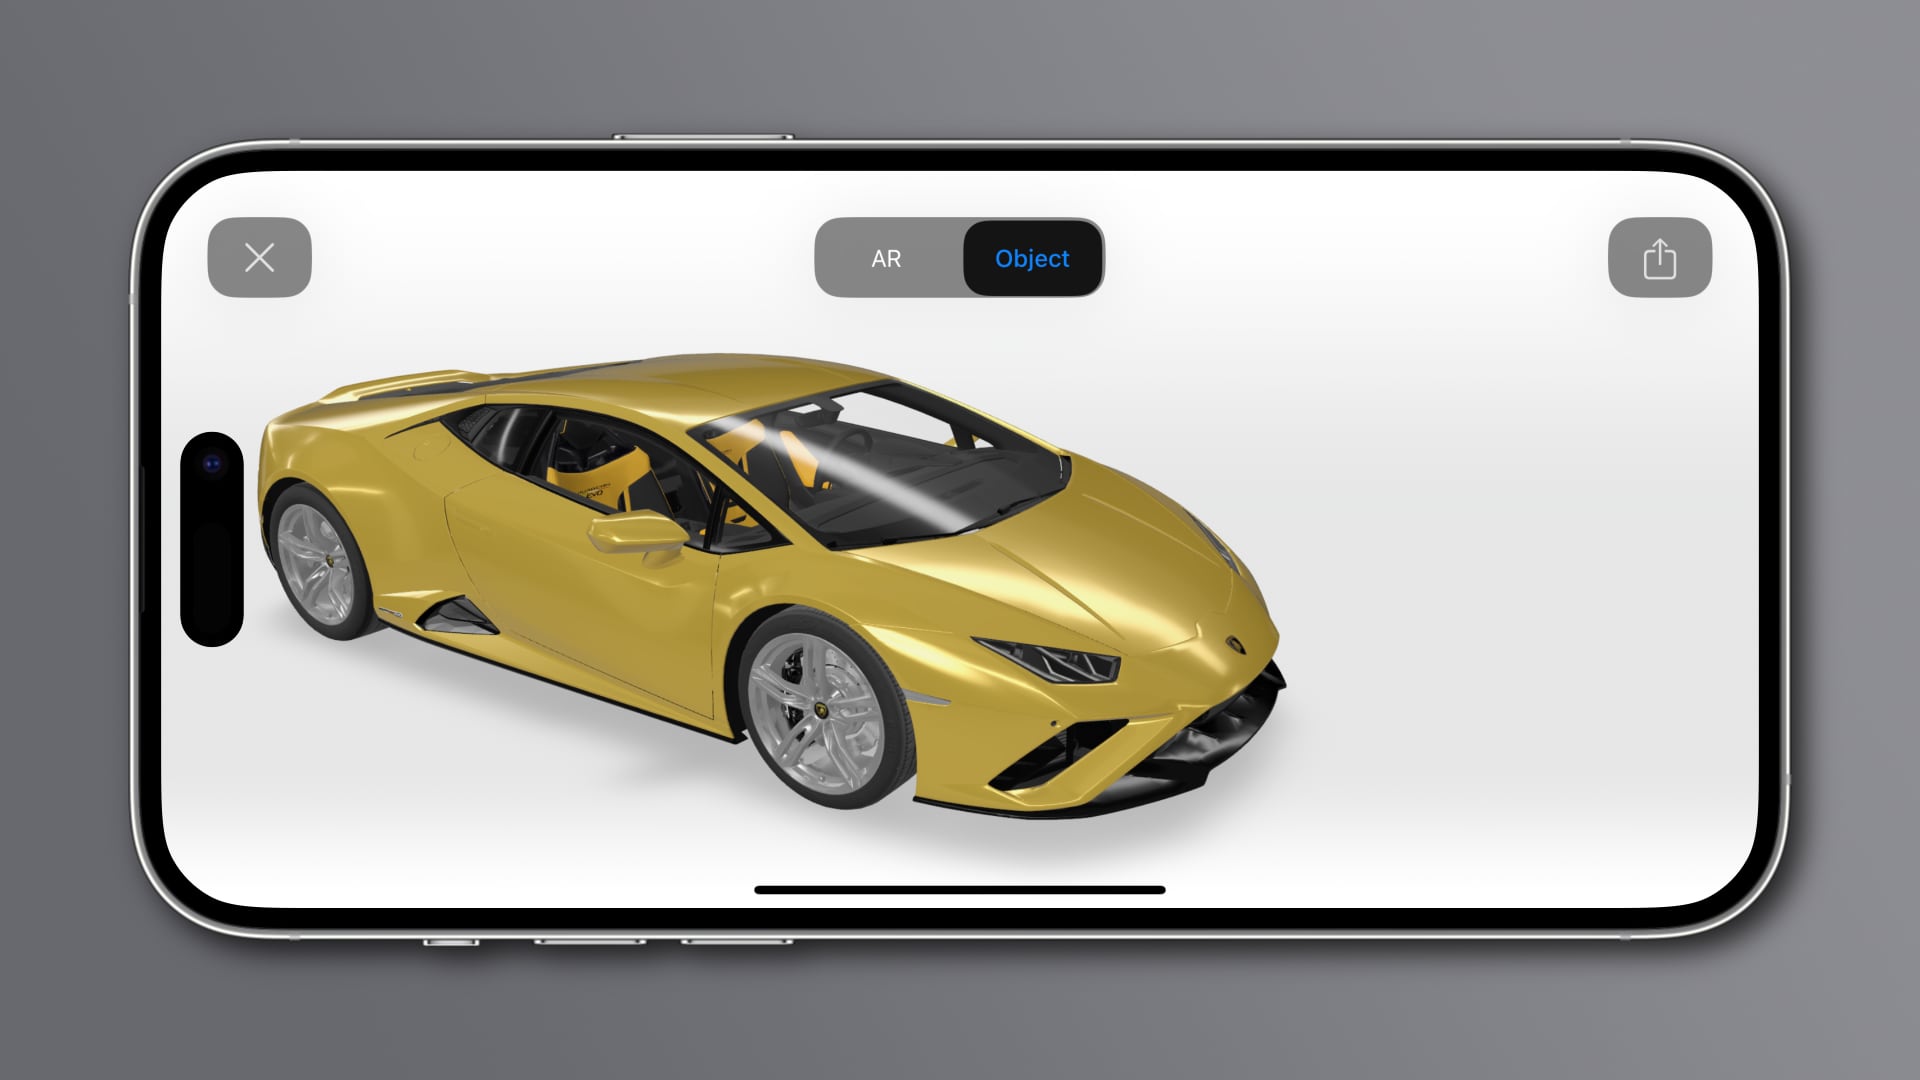 Quick Look preview of a 3D object on iPhone 